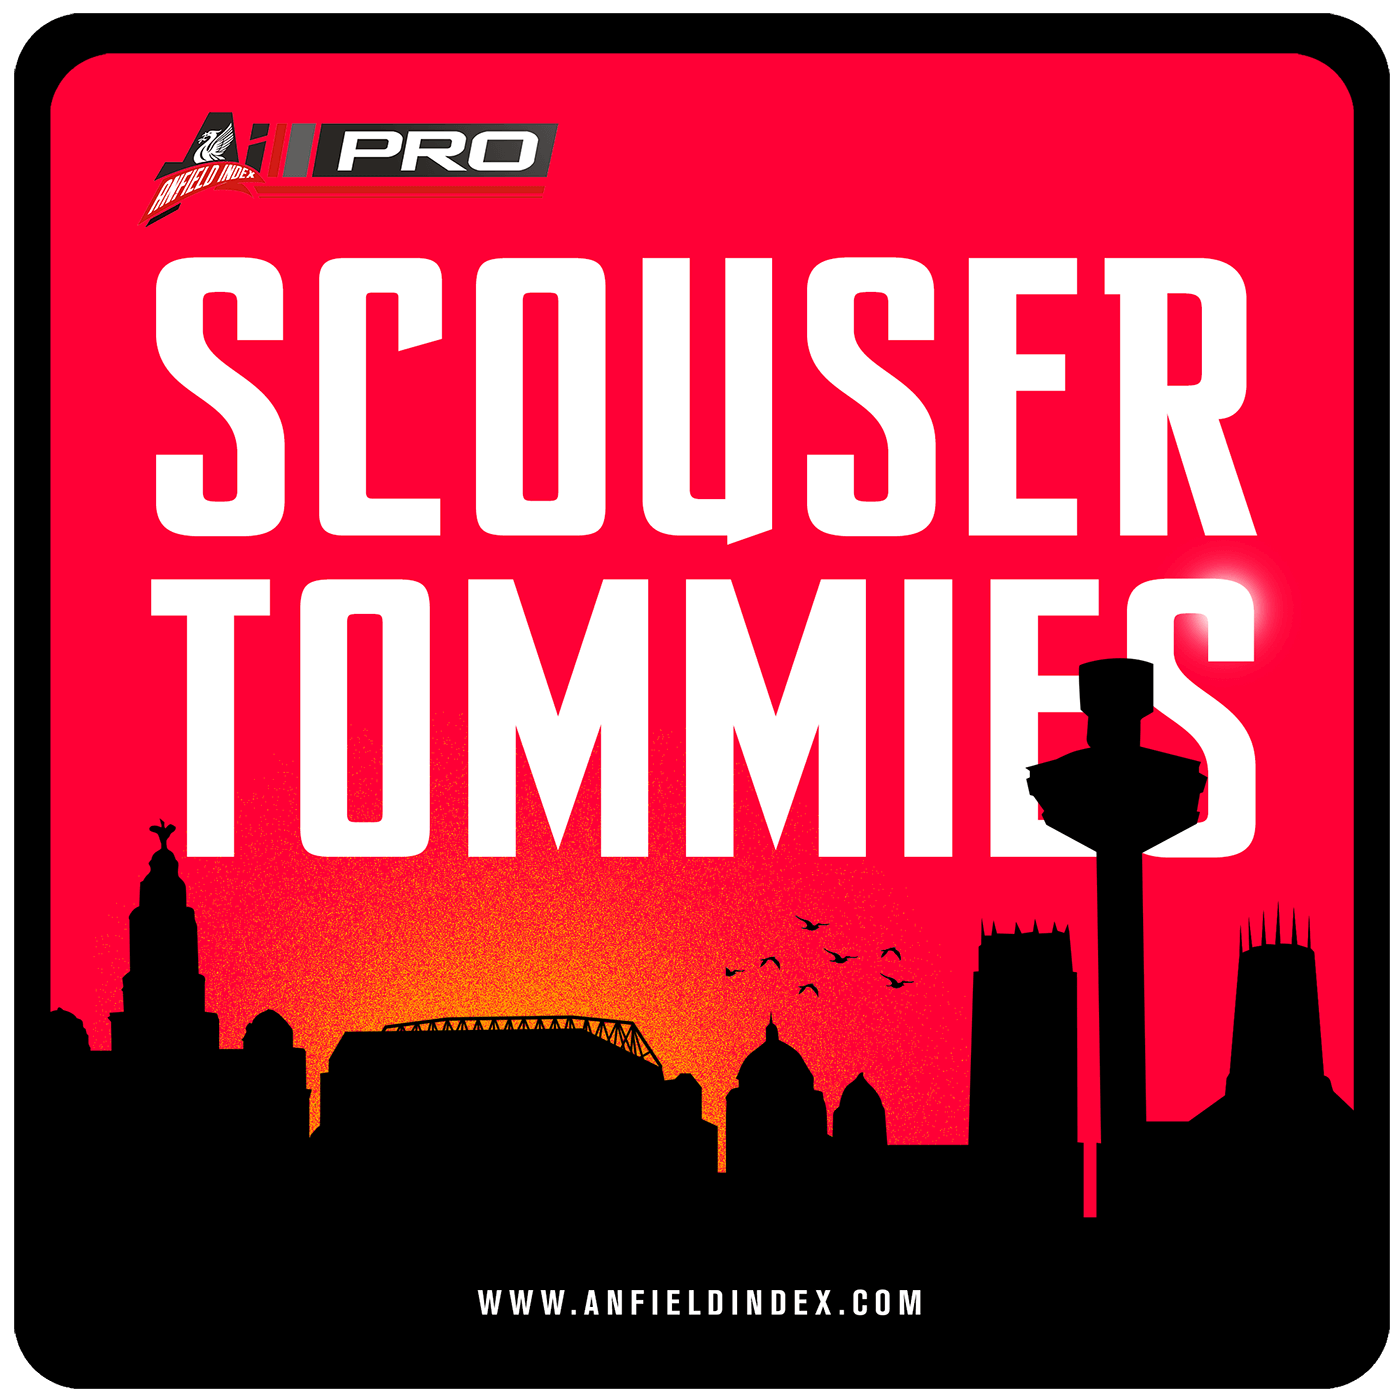 Back on the right lines - Scouser Tommies 